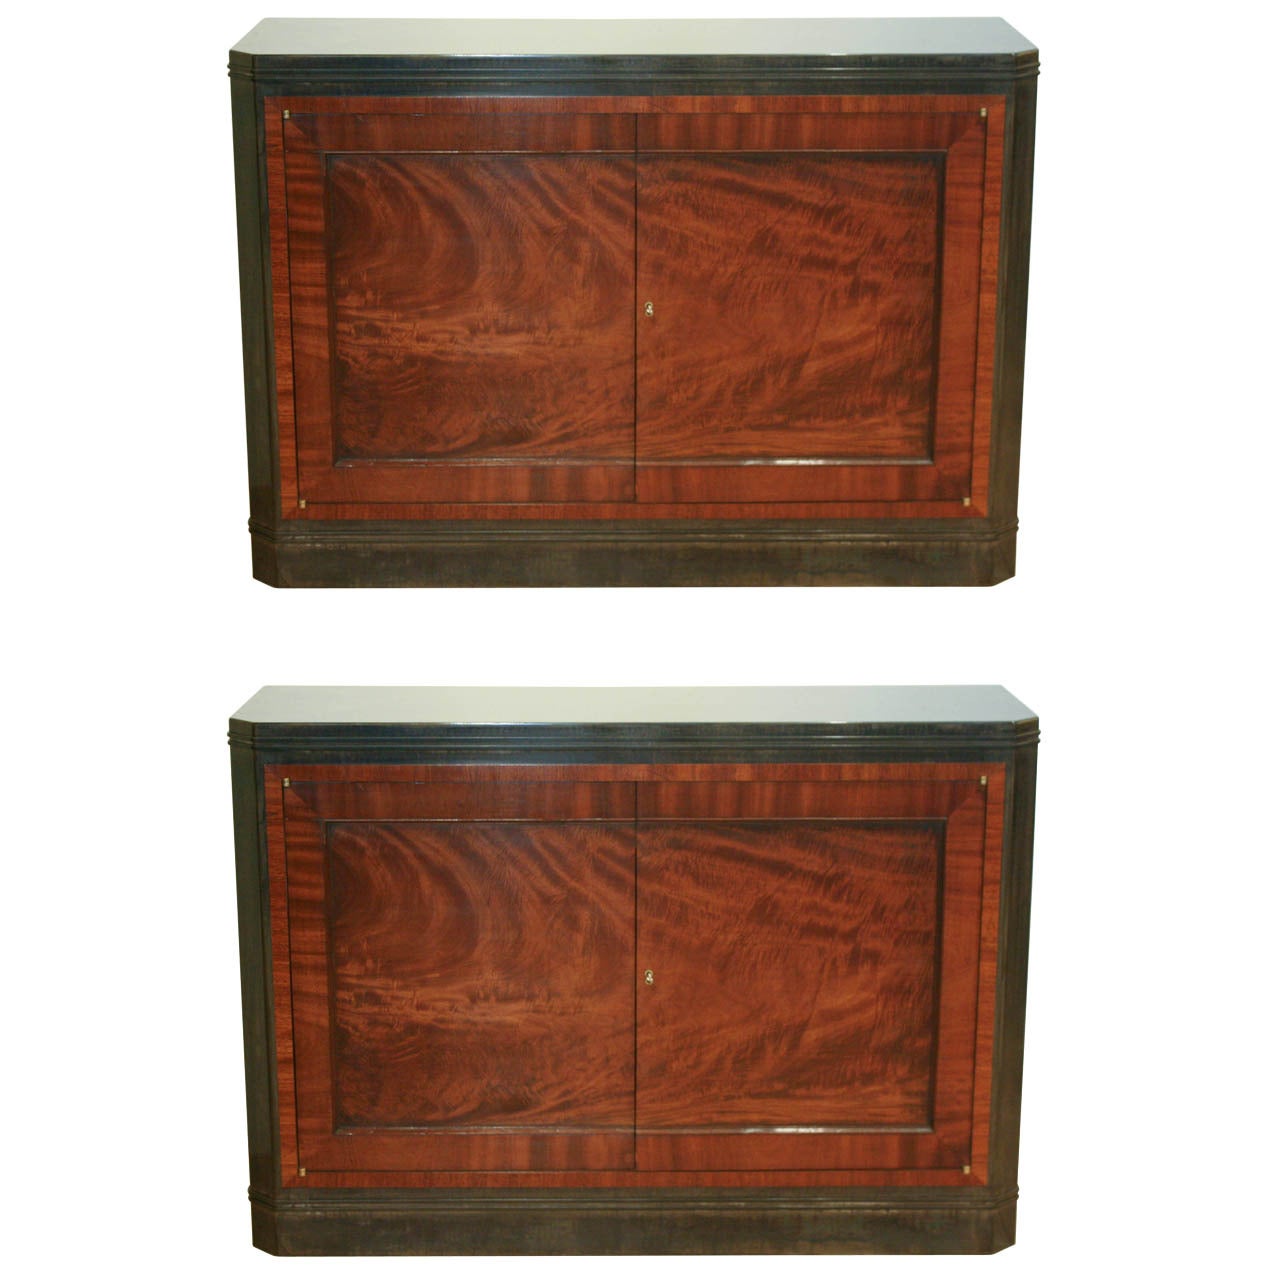 Pair of Mahogany and Patinated Steel Cabinets